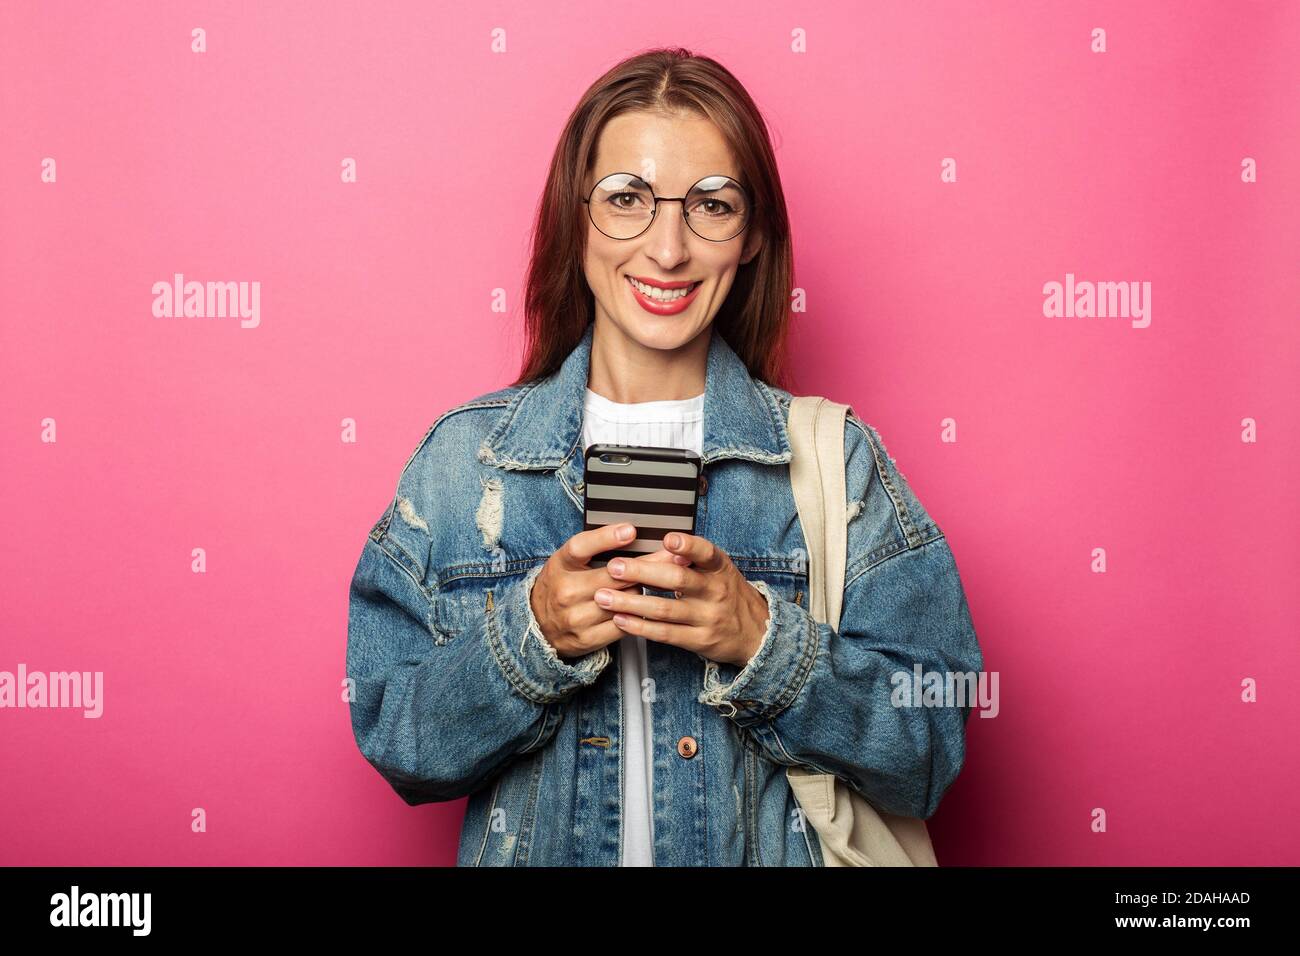 Smiling young woman wearing glasses and denim jacket with phone on pink background. Stock Photo